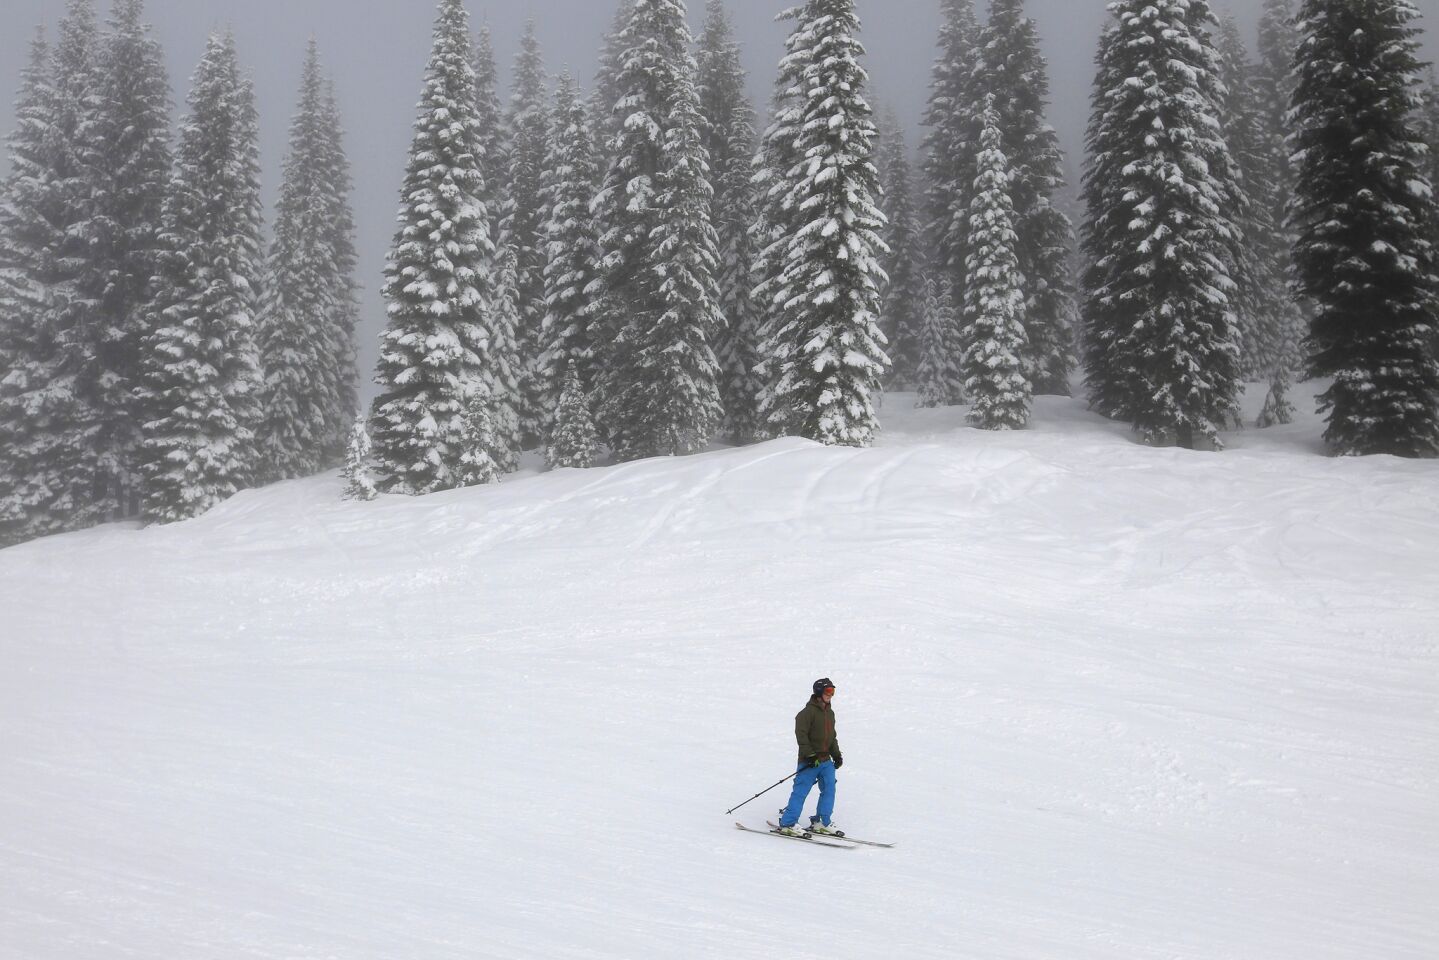 California's snowpack is deepest in five years after recent storms ...